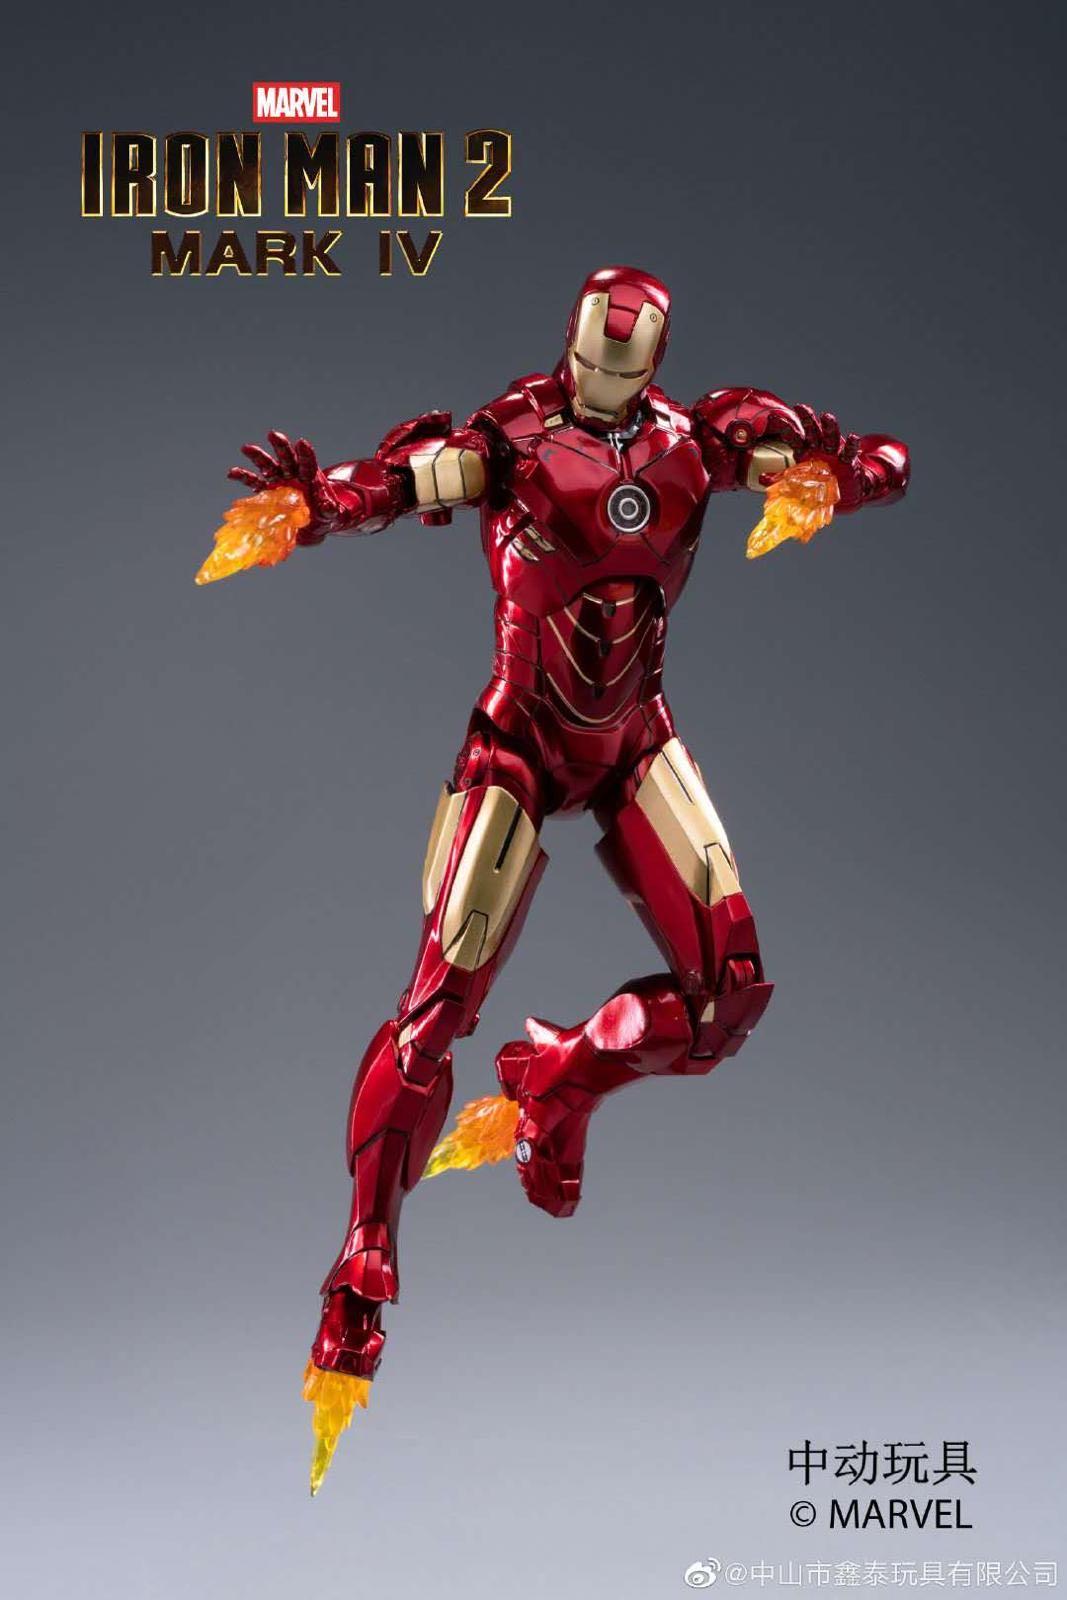 Preorder Marvel Studio Zhong Dong Zd Toys Ironman Mark Iv 7 Action Figure Officially Licensed Hobbies Toys Toys Games On Carousell